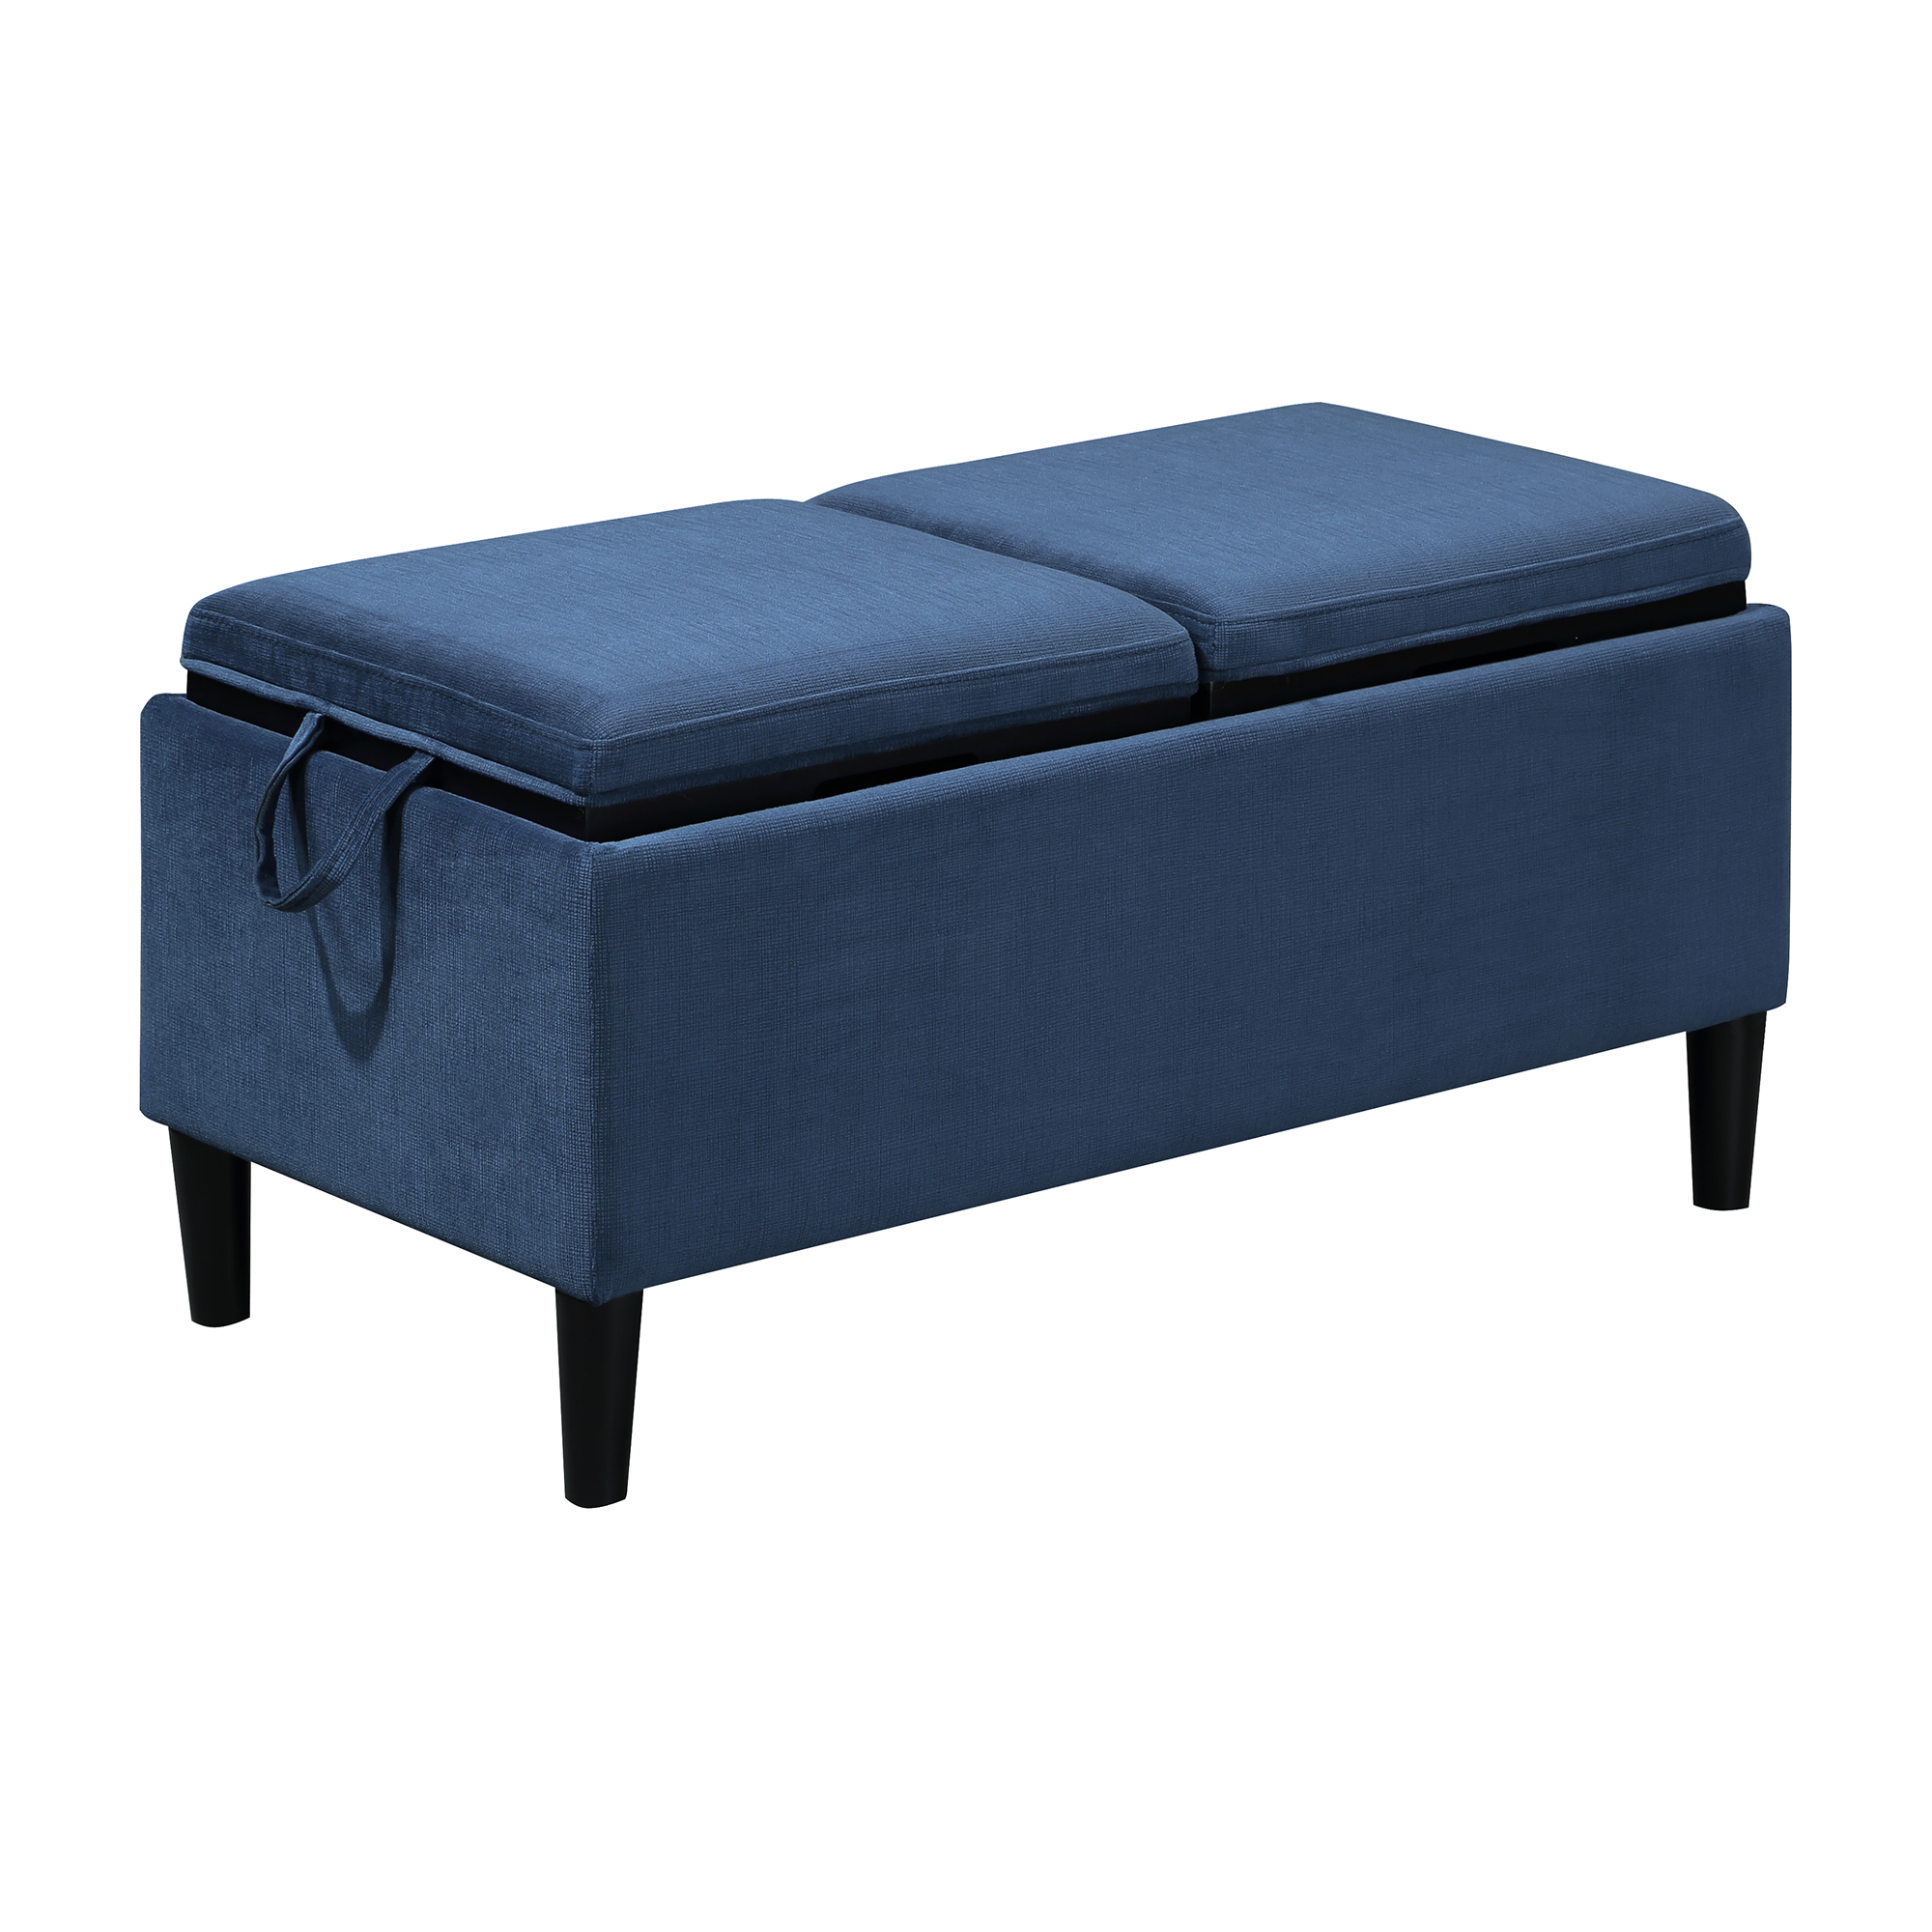 Convenience Concepts Designs4Comfort Magnolia Storage Ottoman with Reversible Trays, Dark Blue Corduroy - image 4 of 4